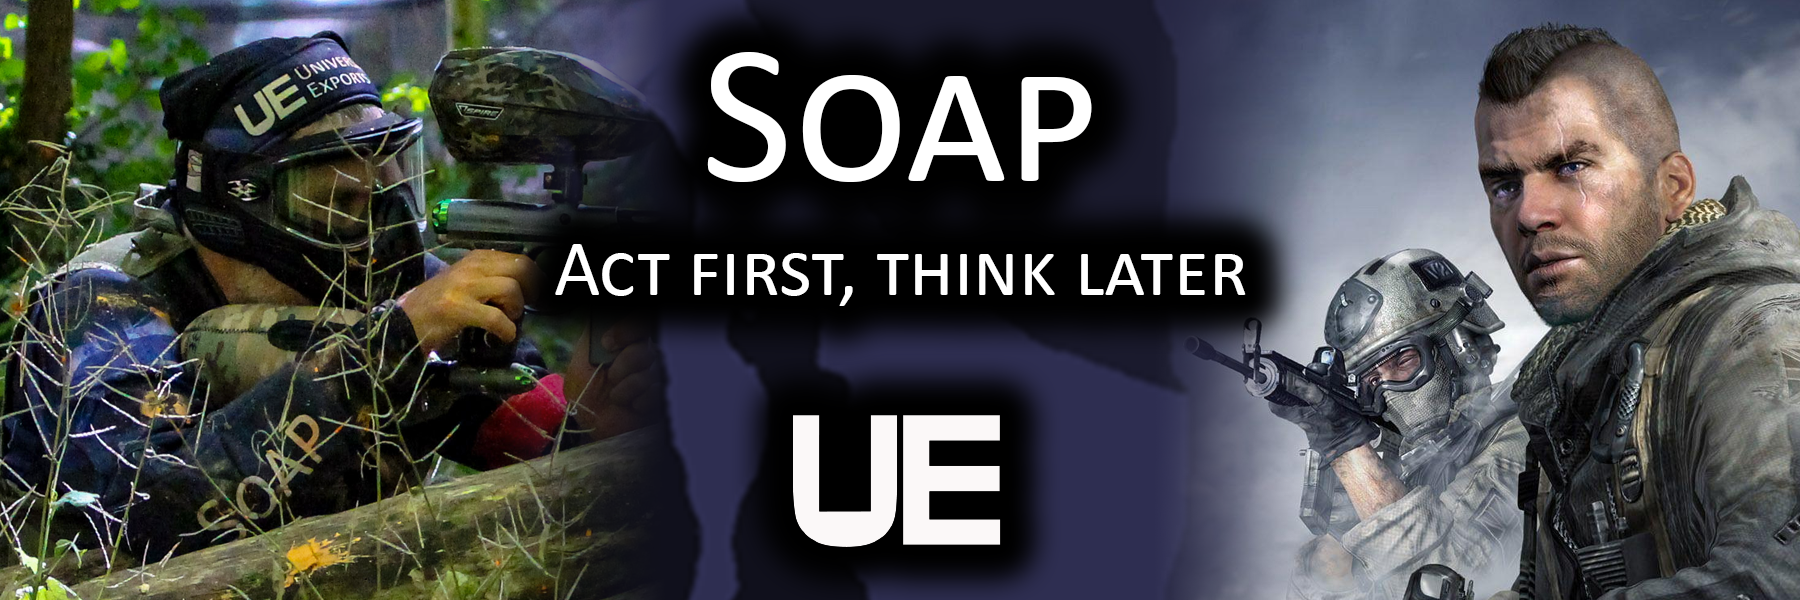 Soap | Act first, think later